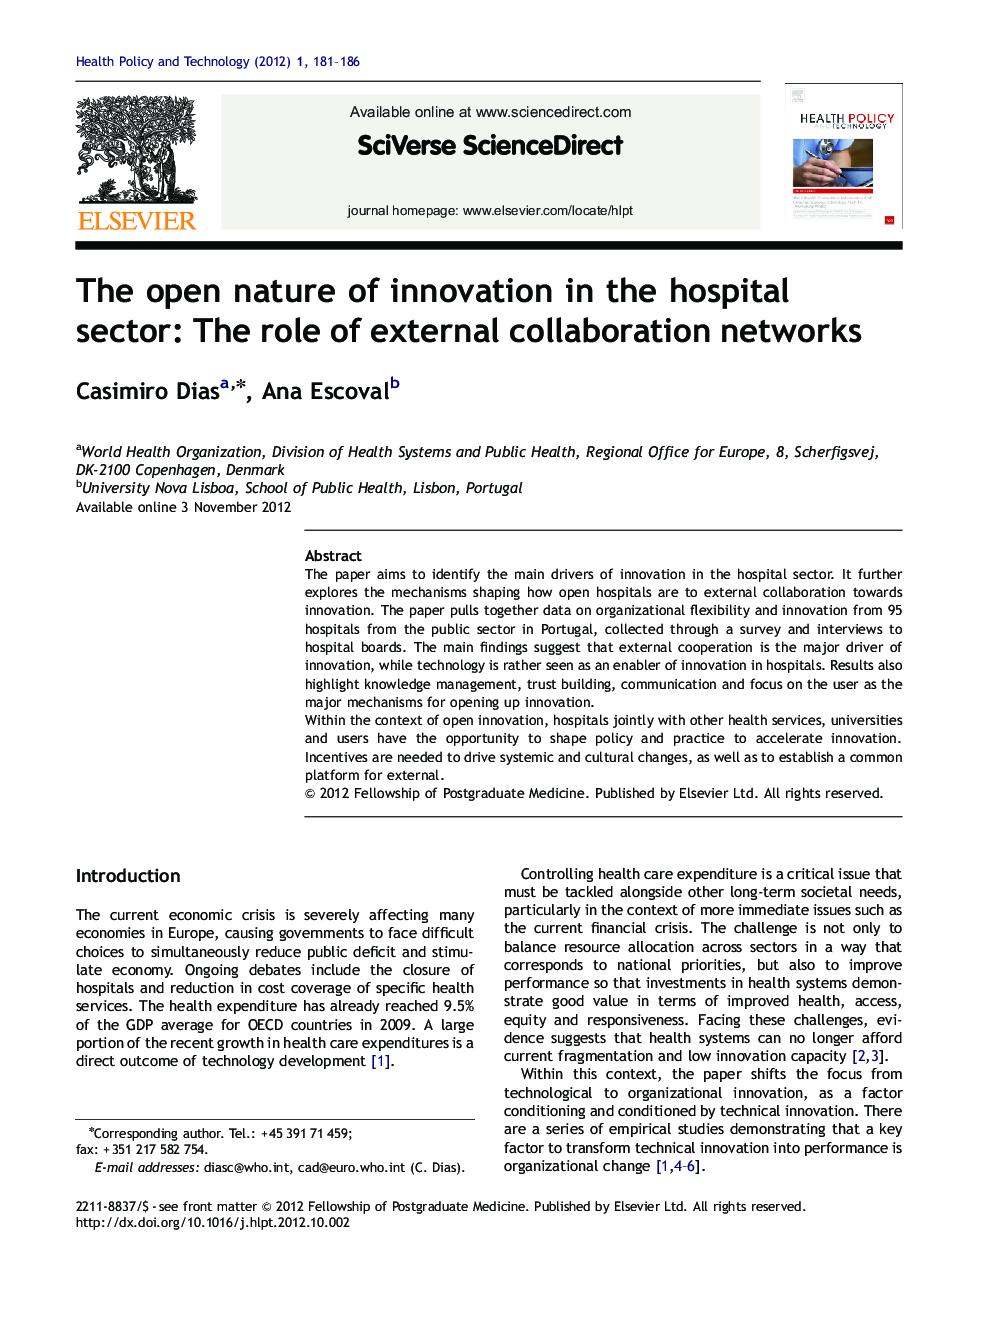 The open nature of innovation in the hospital sector: The role of external collaboration networks